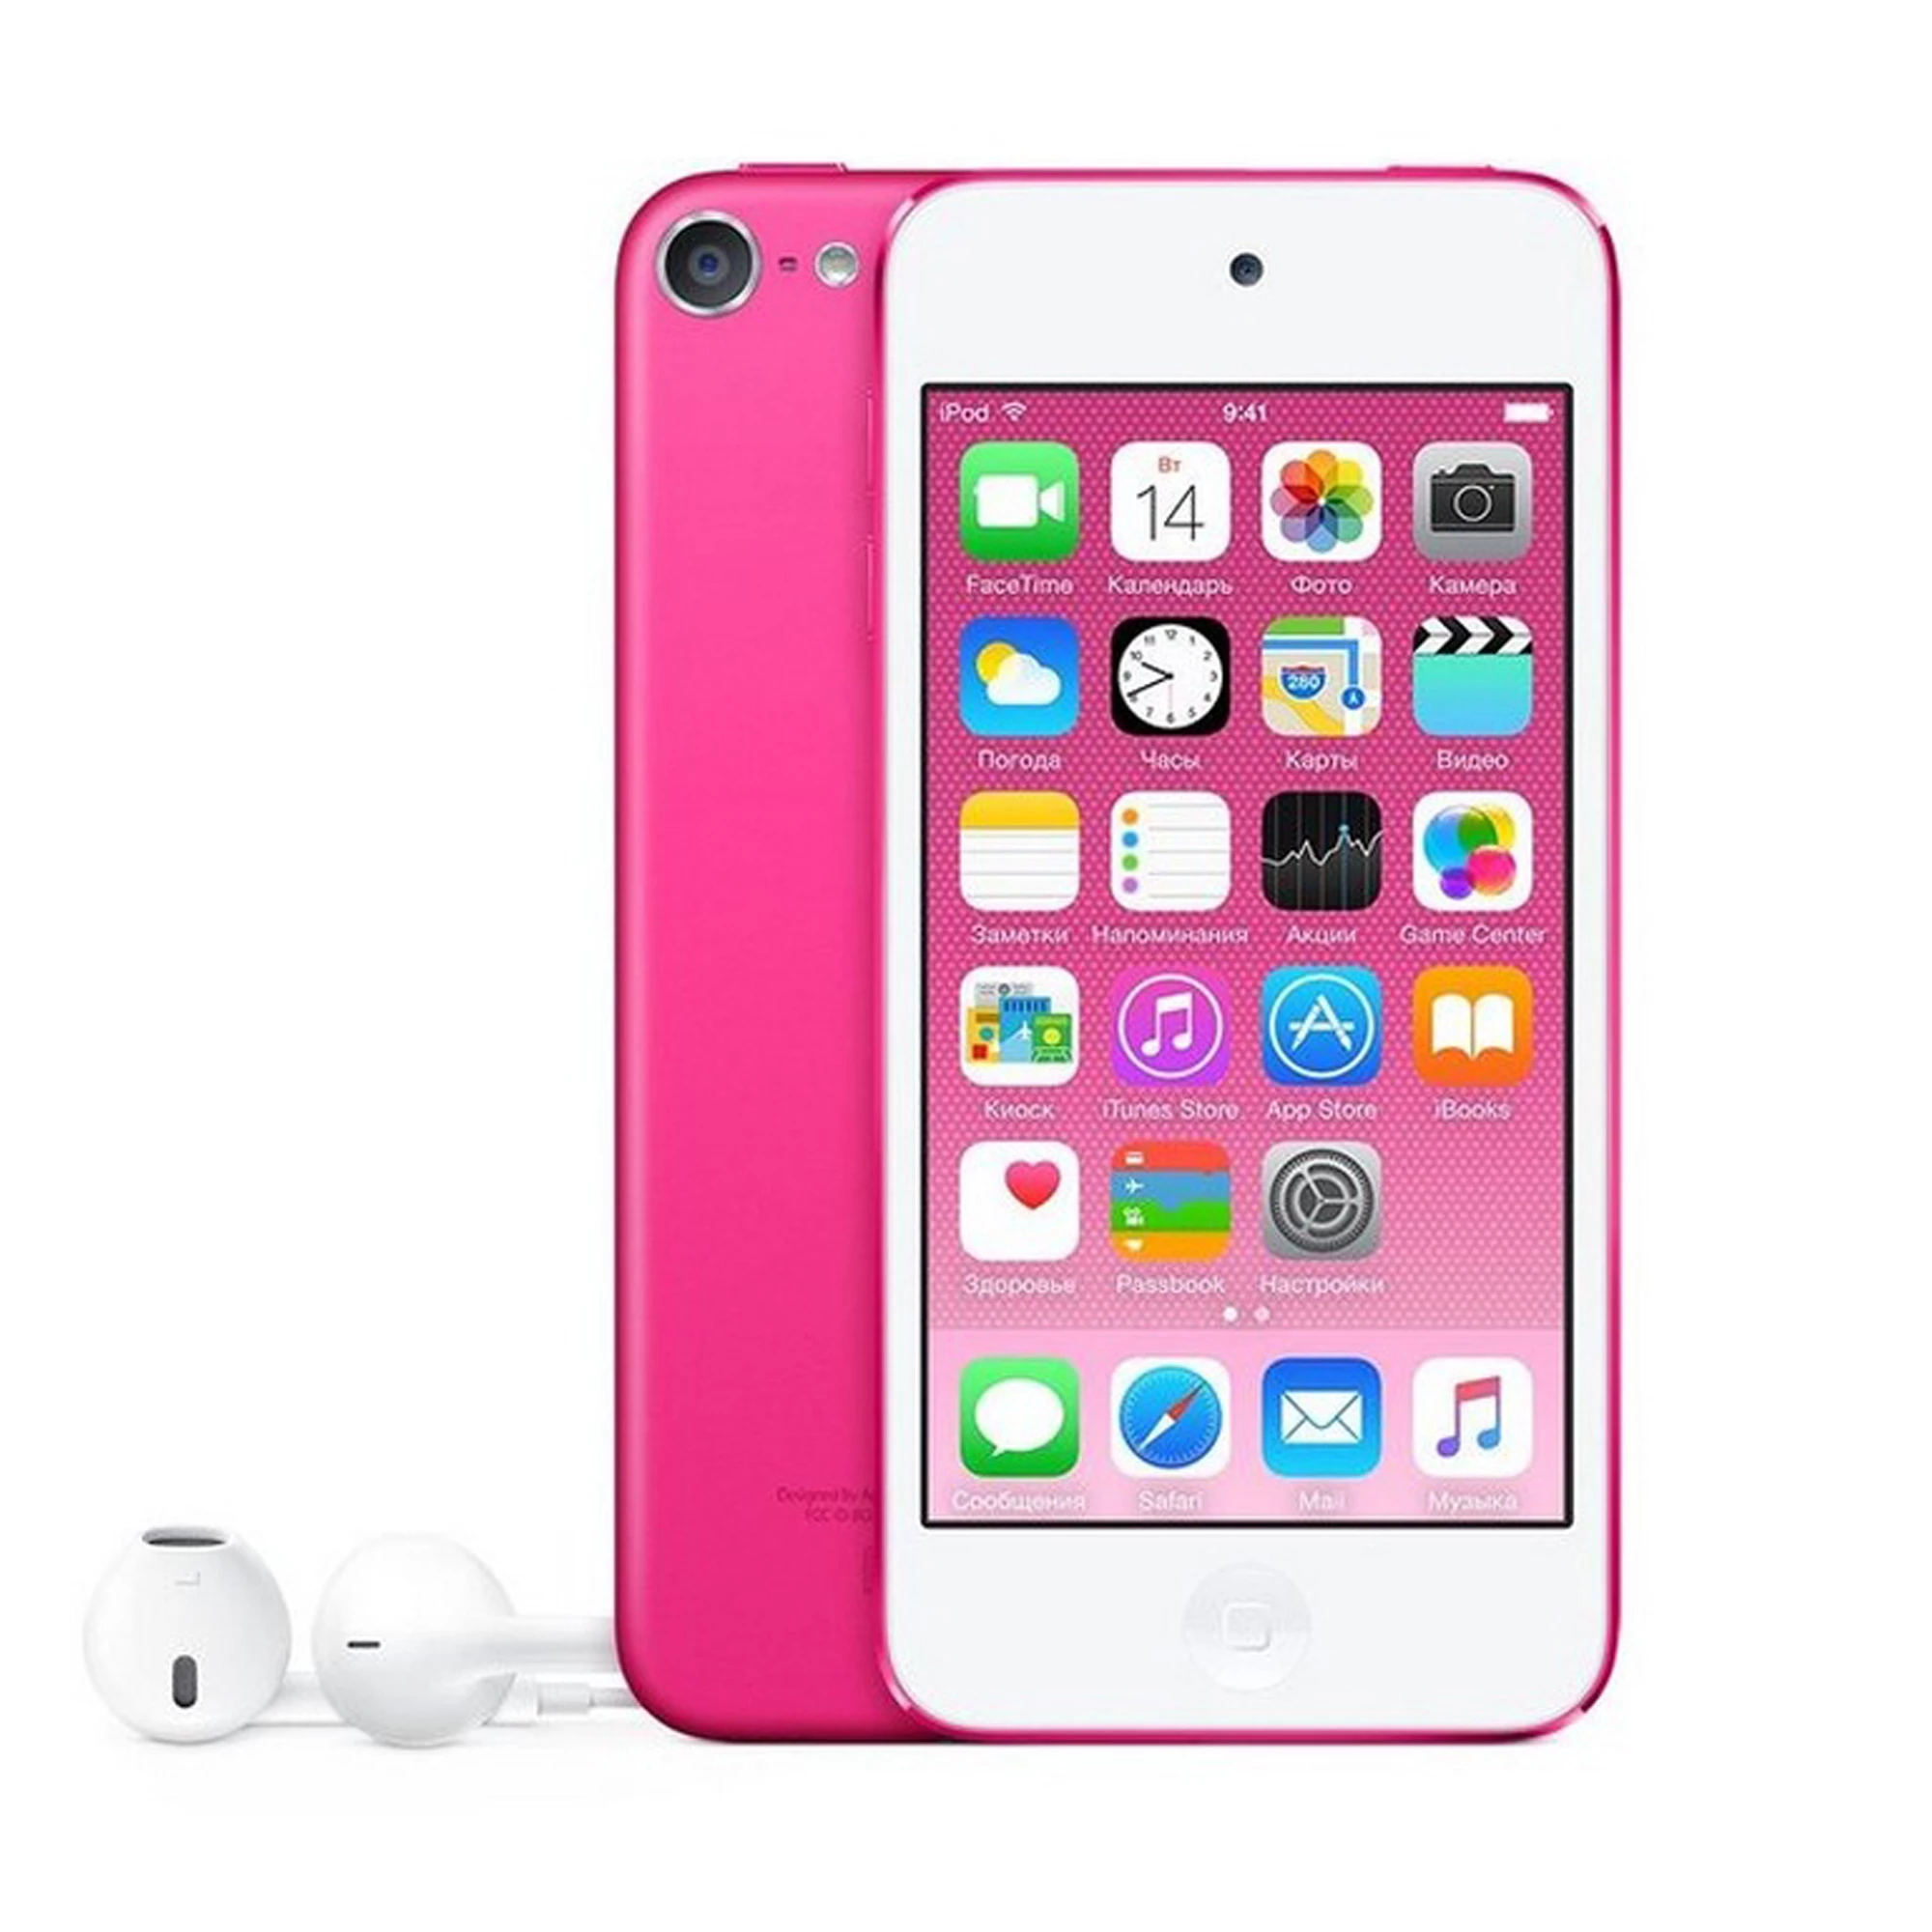 iPod touch 6Gen 64GB Pink